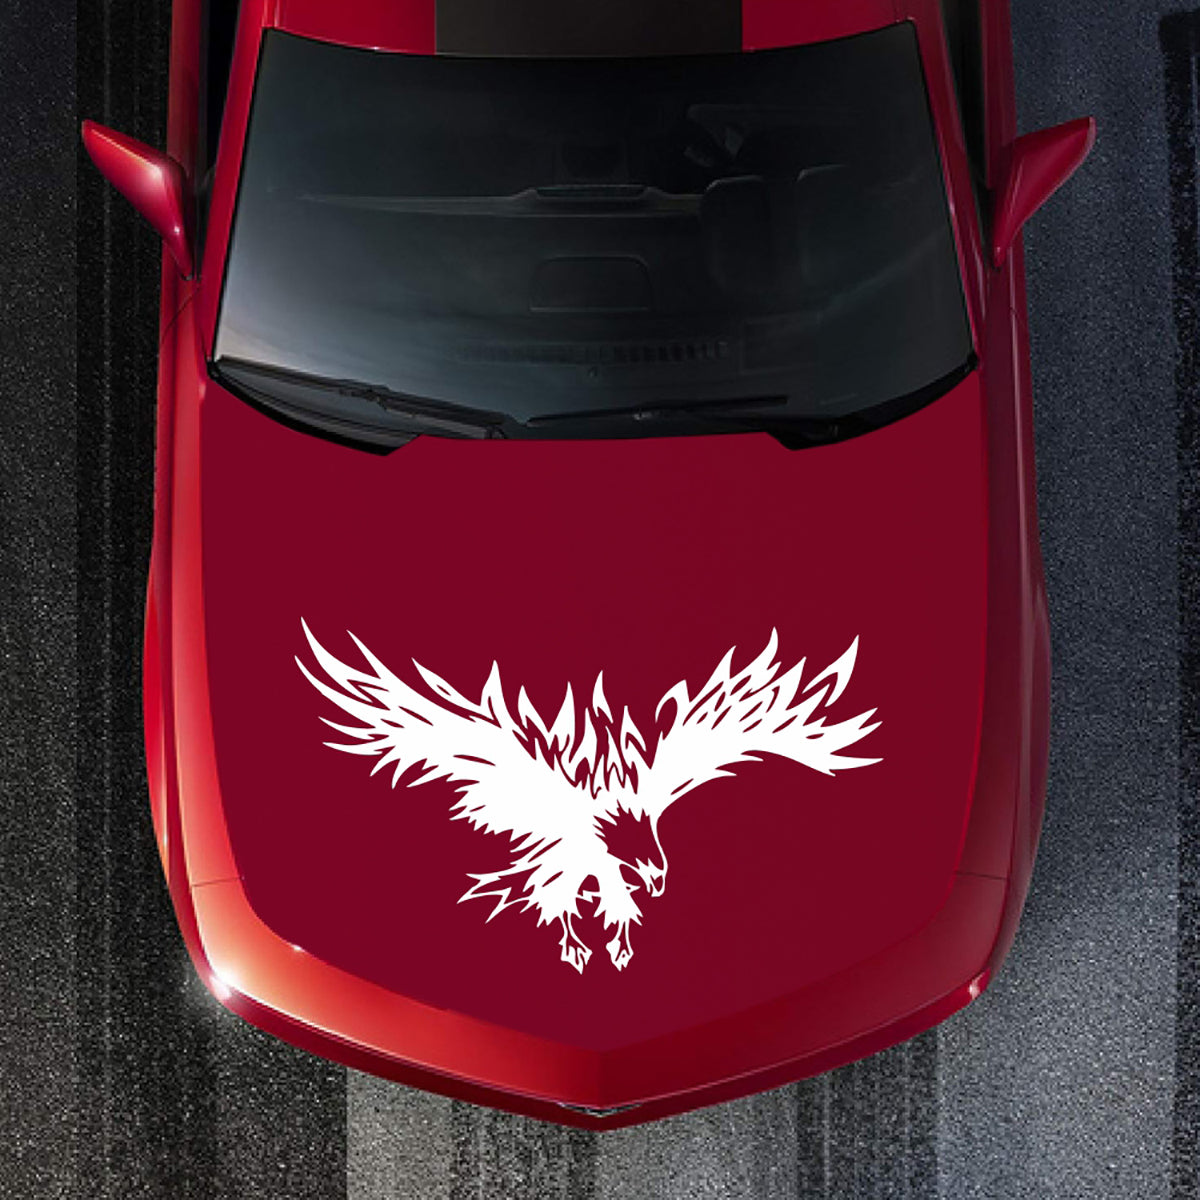 Dark Red 33x50cm Universal Car Stickers Body Hood Vinyl Eagle Engine Cover Decal Decoration